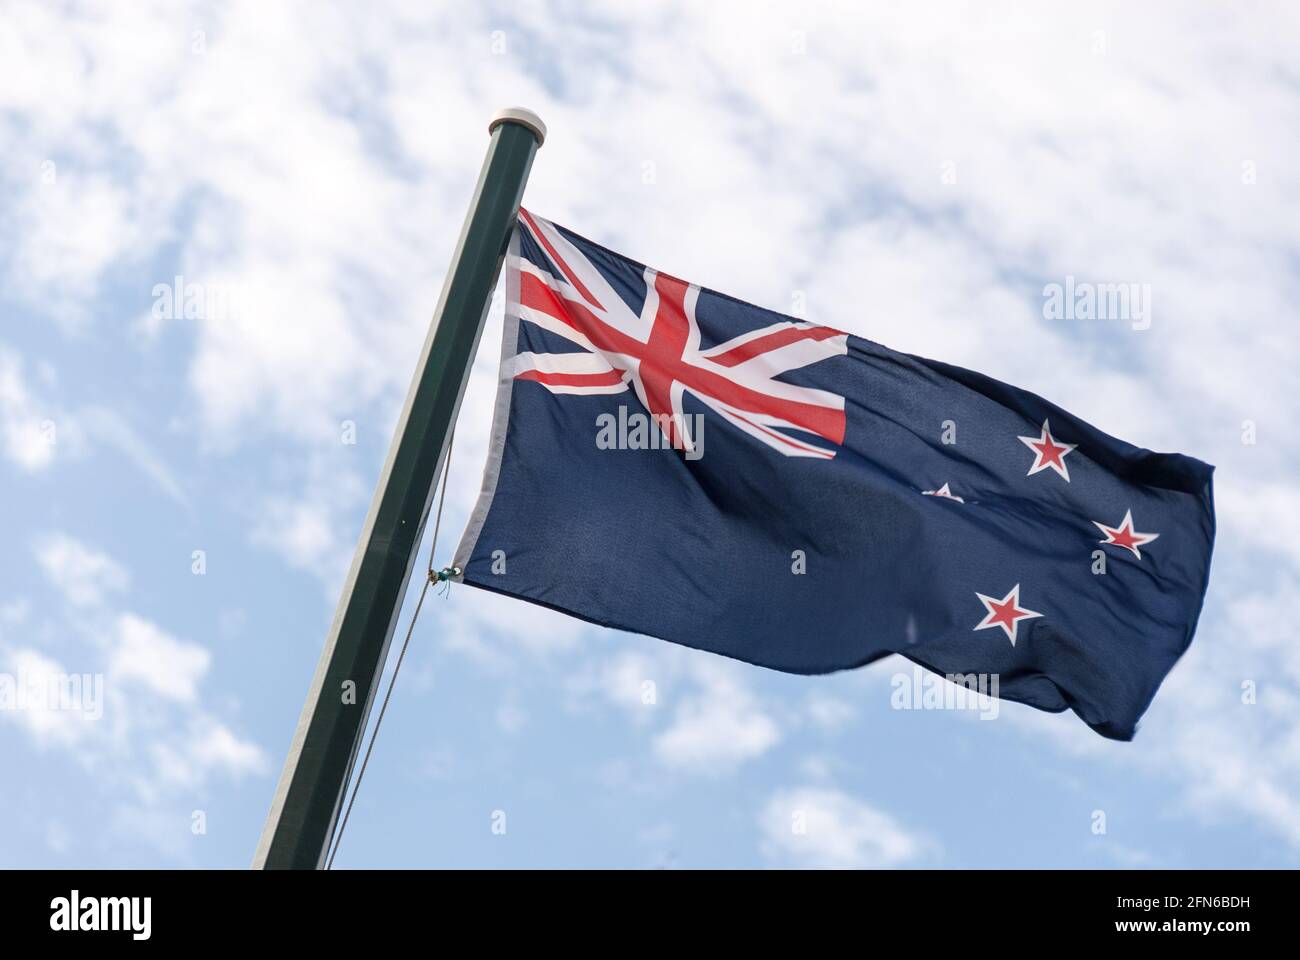 Die Flagge Neuseelands im Wind. - New Zealand flag in the wind. Stock Photo